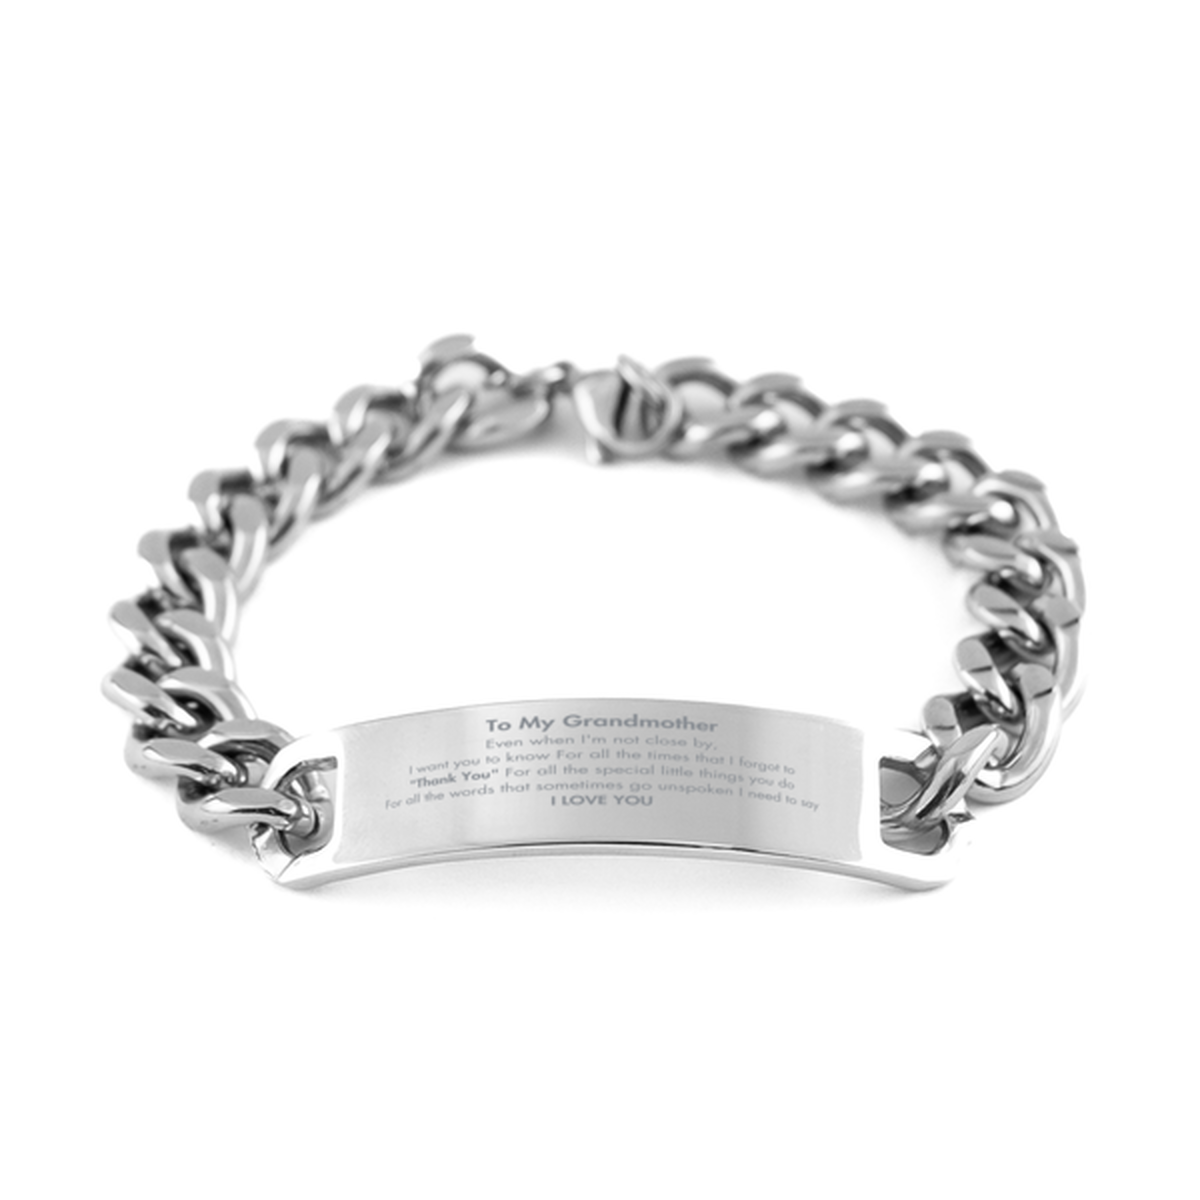 Thank You Gifts for Grandmother, Keepsake Cuban Chain Stainless Steel Bracelet Gifts for Grandmother Birthday Mother's day Father's Day Grandmother For all the words That sometimes go unspoken I need to say I LOVE YOU